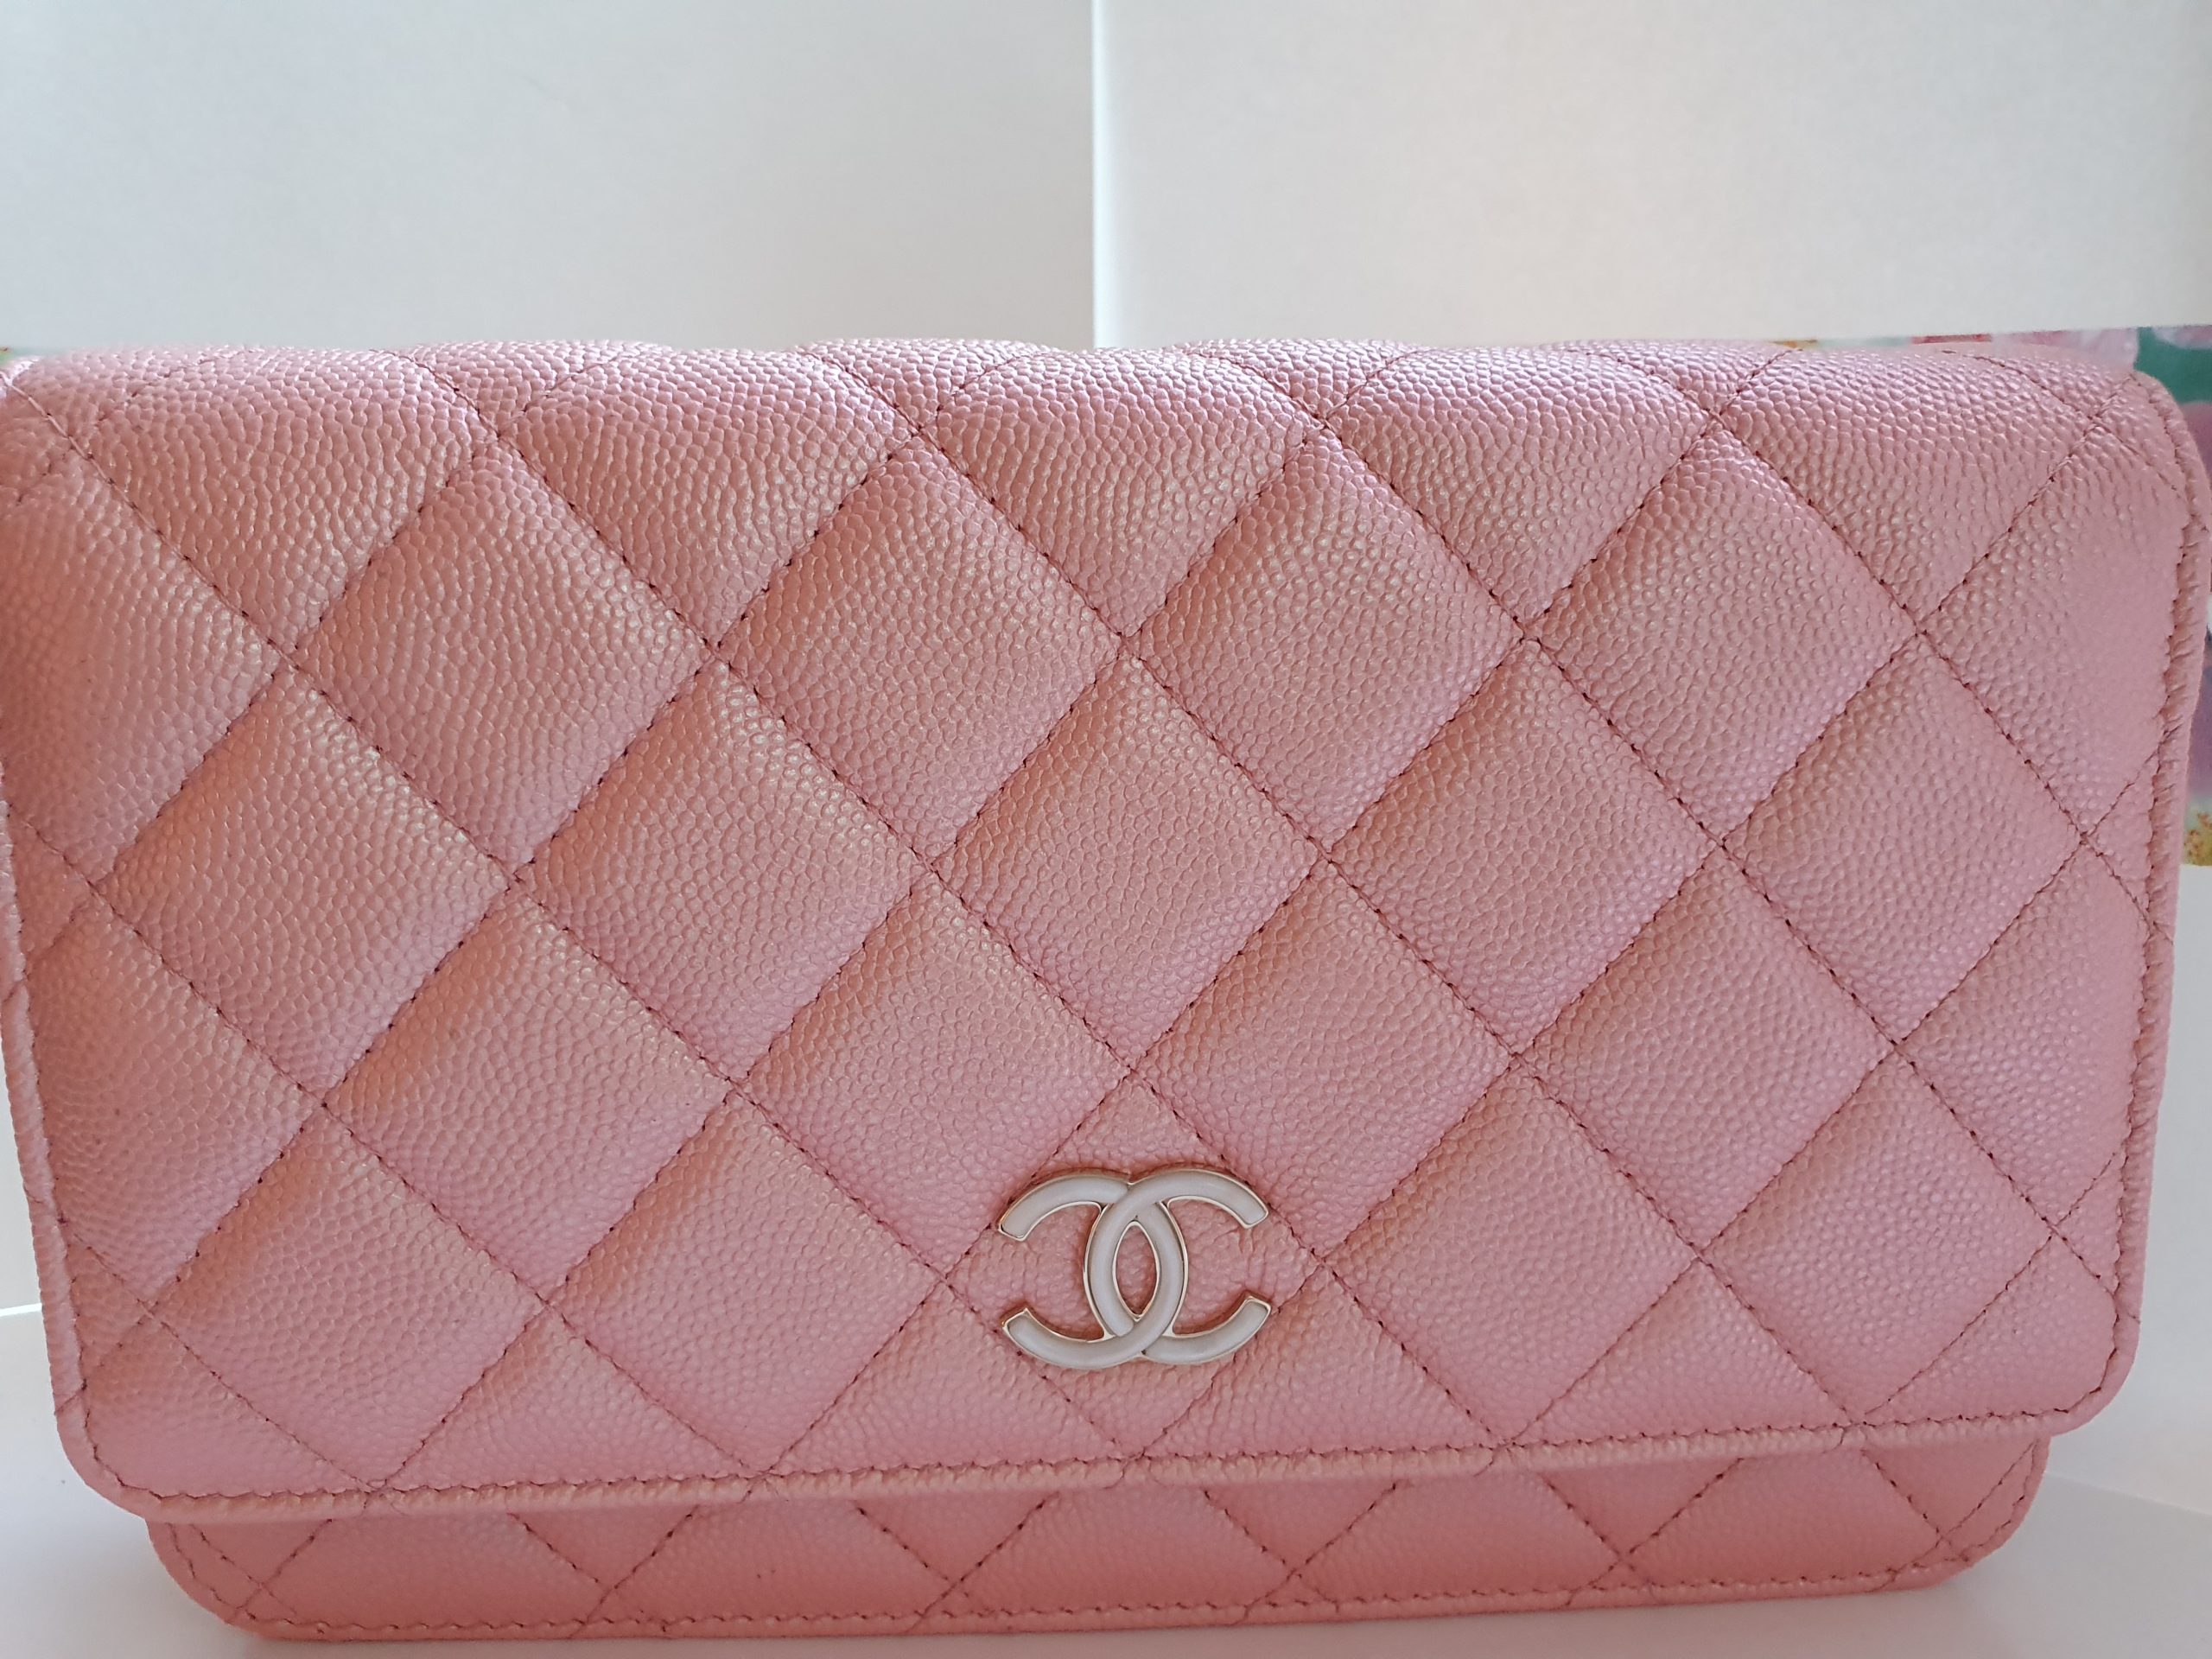 Chanel Bags World on Instagram: “M81389 Rose Pink This Micro Métis chain  bag in supple Monogram Empreinte leather condenses the clas…